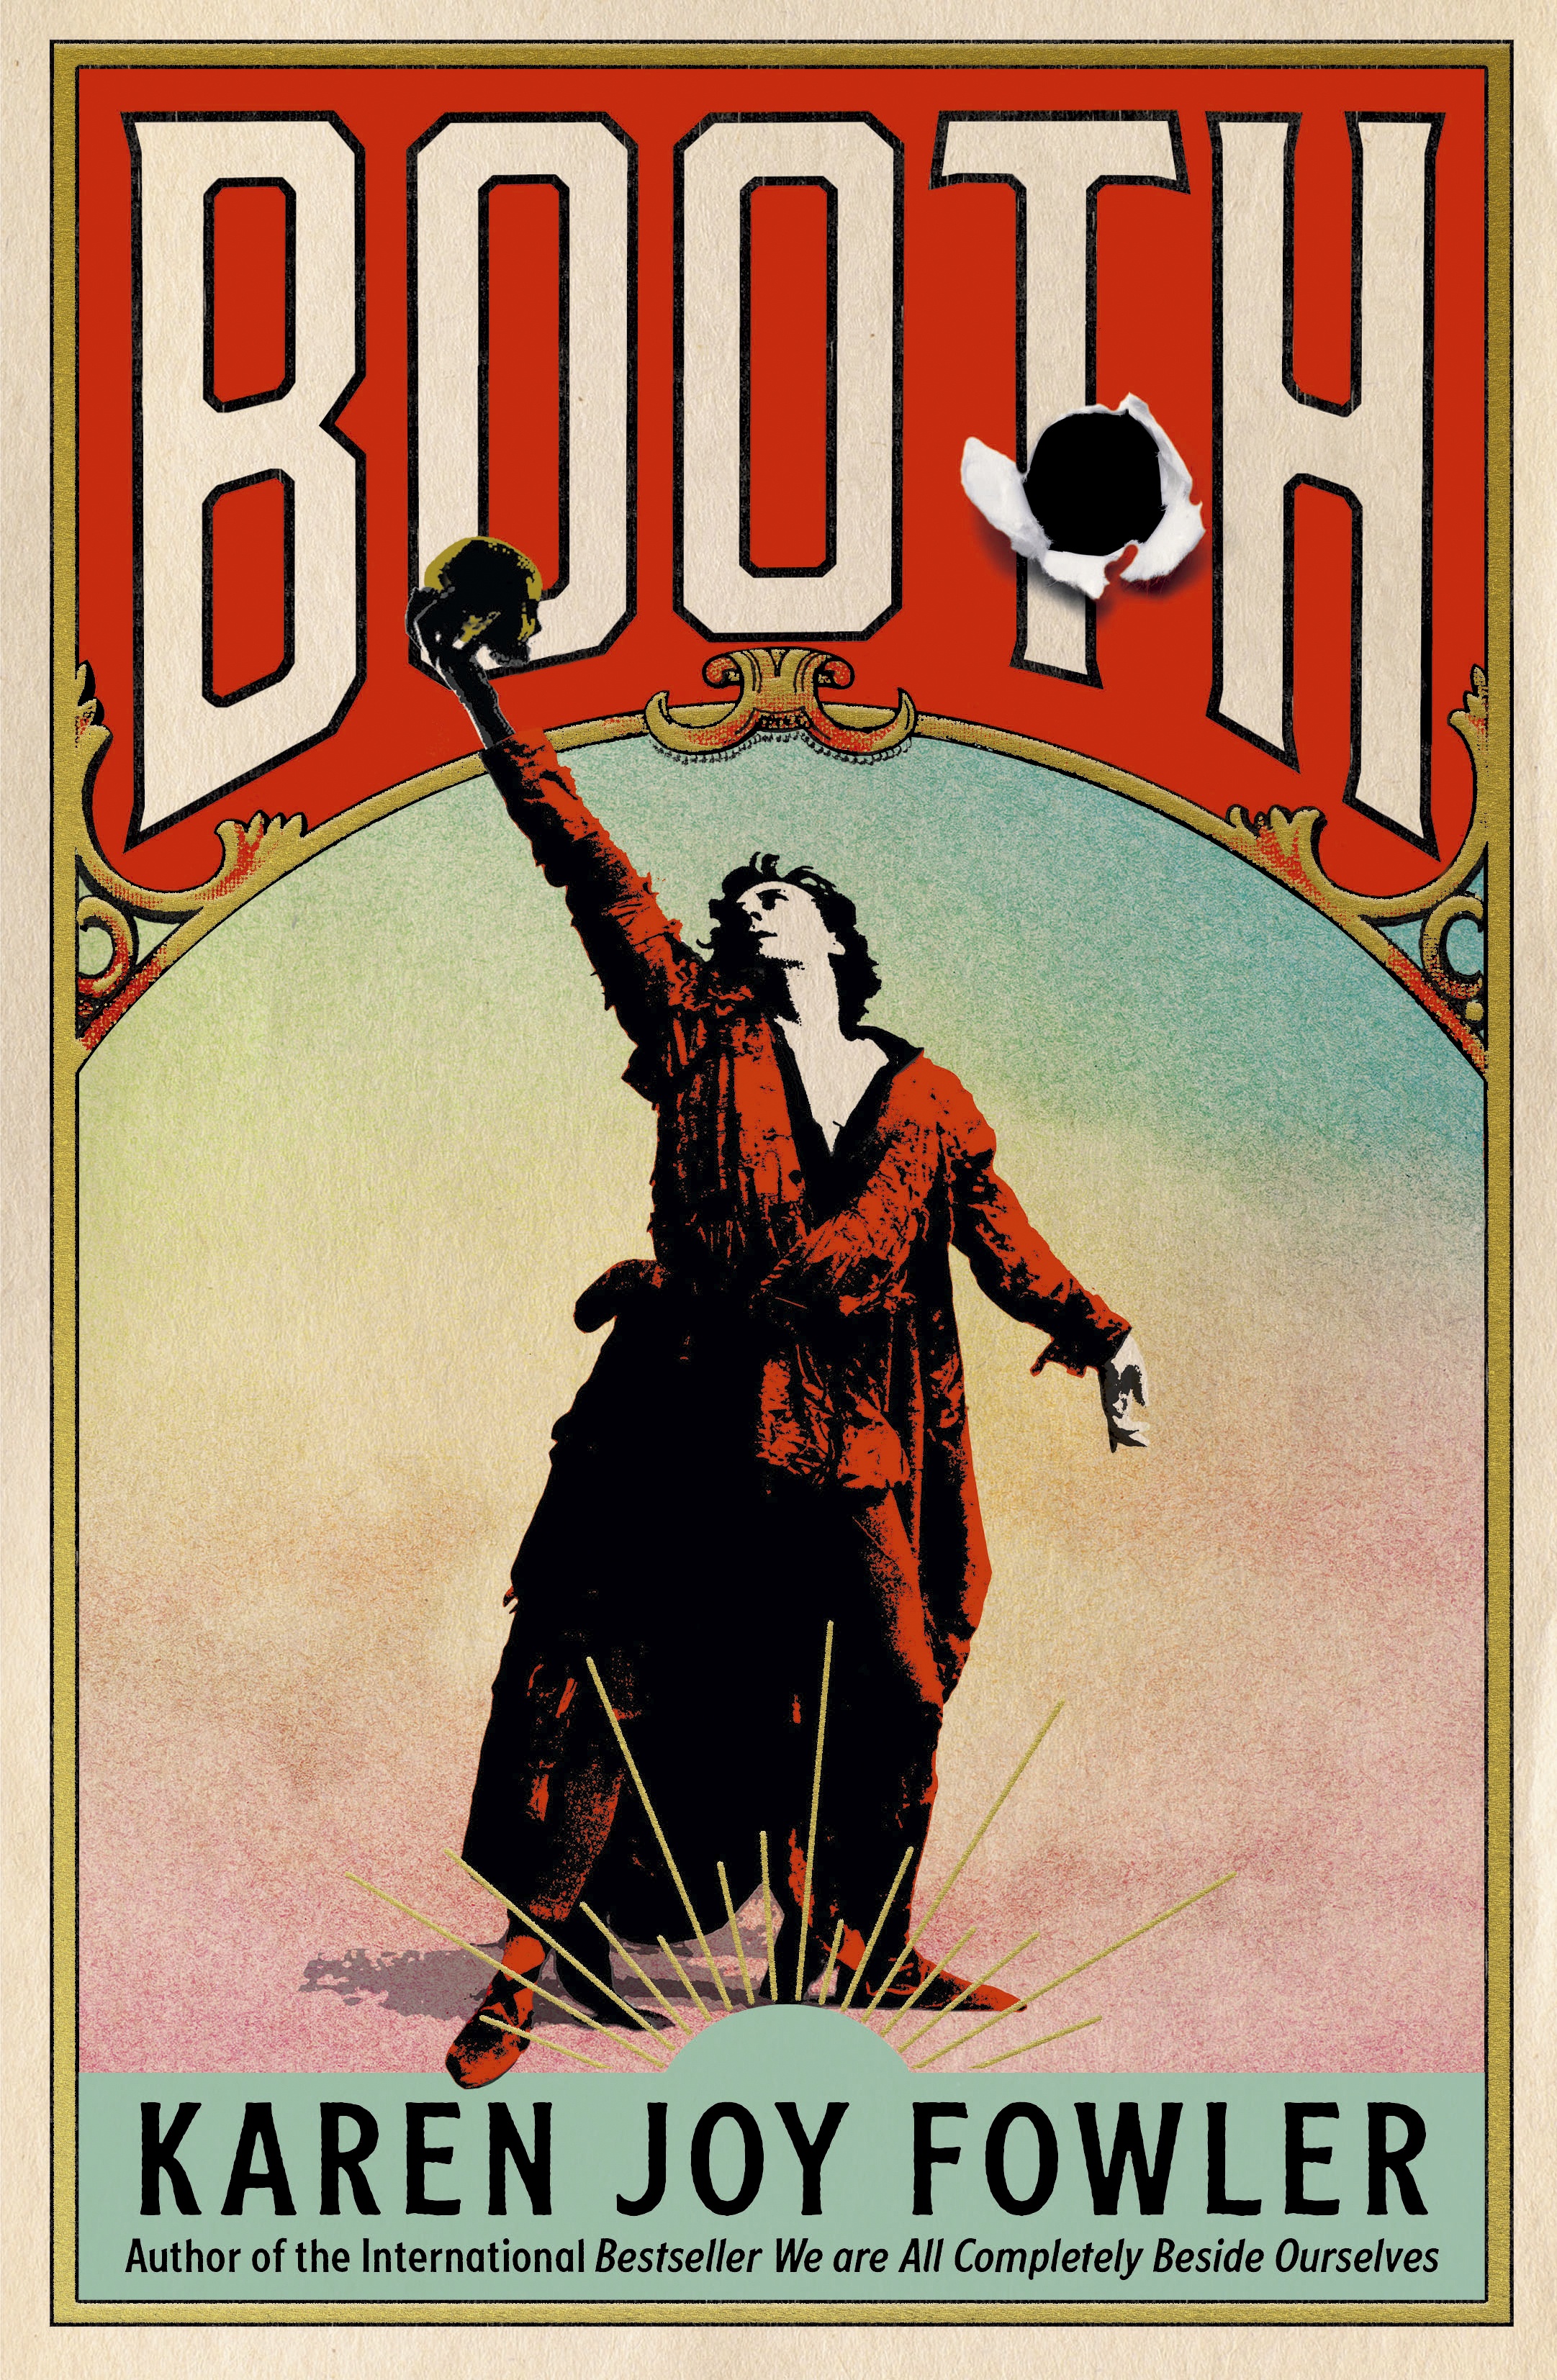 The book cover of Booth by Karen Joy Fowler features a Shakespearean actor in a robe holding up a skull, and a bullet hole